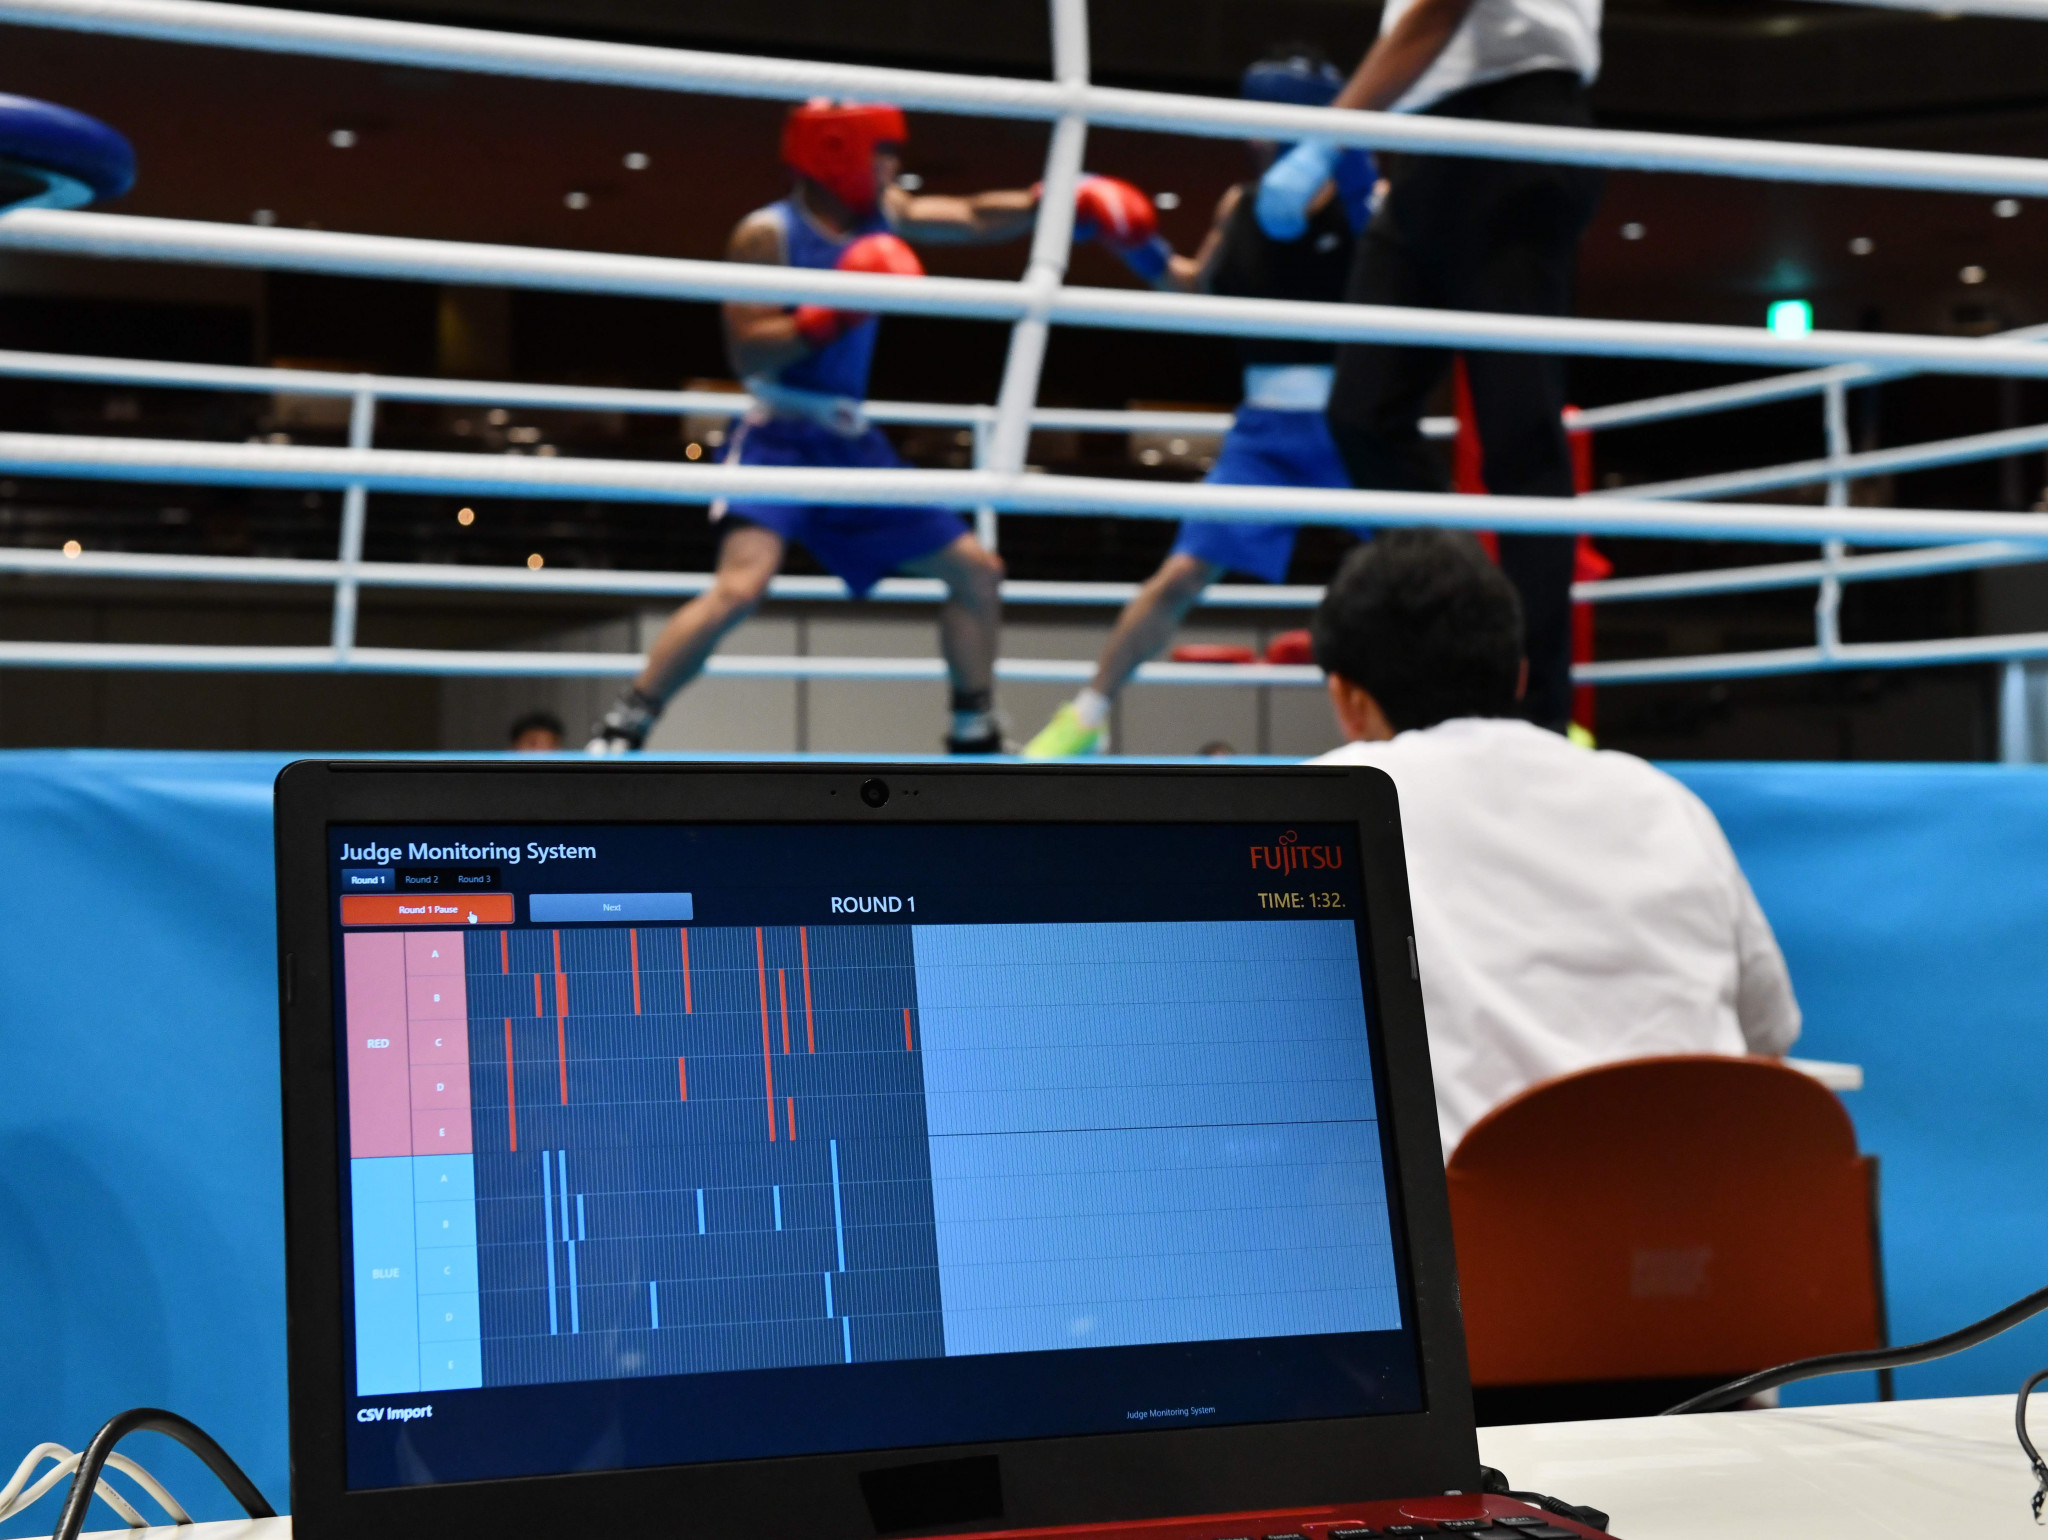 A judges monitoring system was introduced by the IOC boxing taskforce at a Tokyo 2020 test event ©Getty Images 